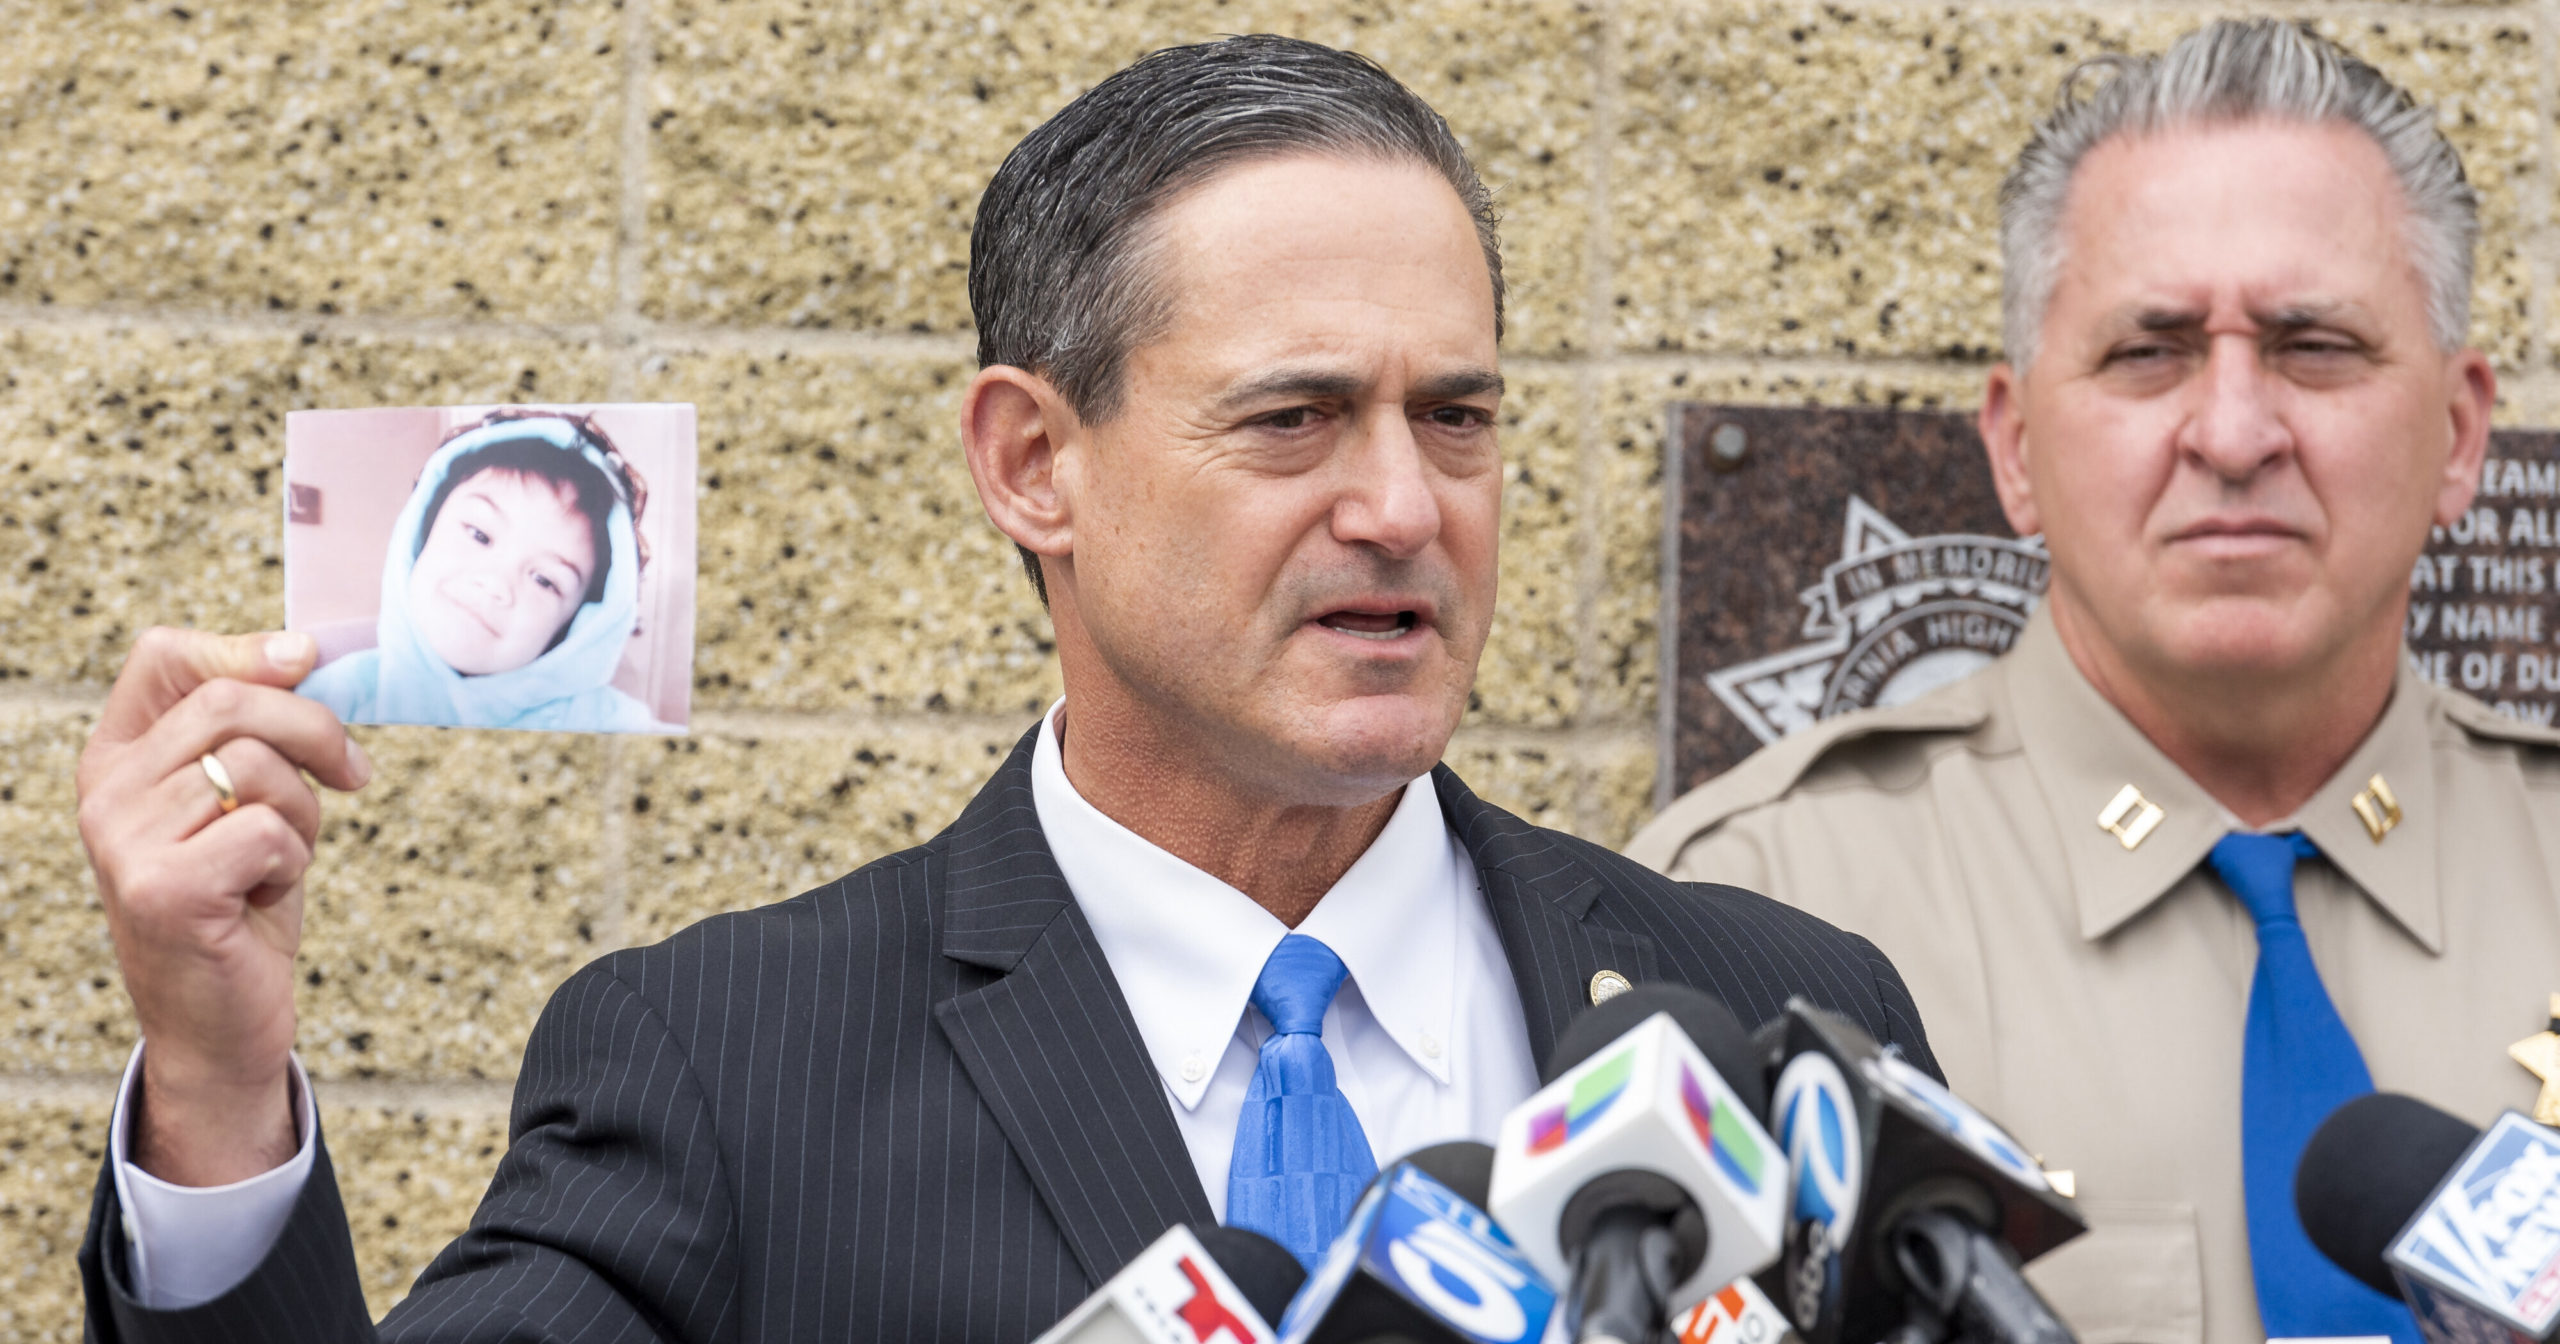 Orange County District Attorney Todd Spitzer holds up a photo of Aiden Leos during a news conference outside in Santa Ana, California, on Monday.